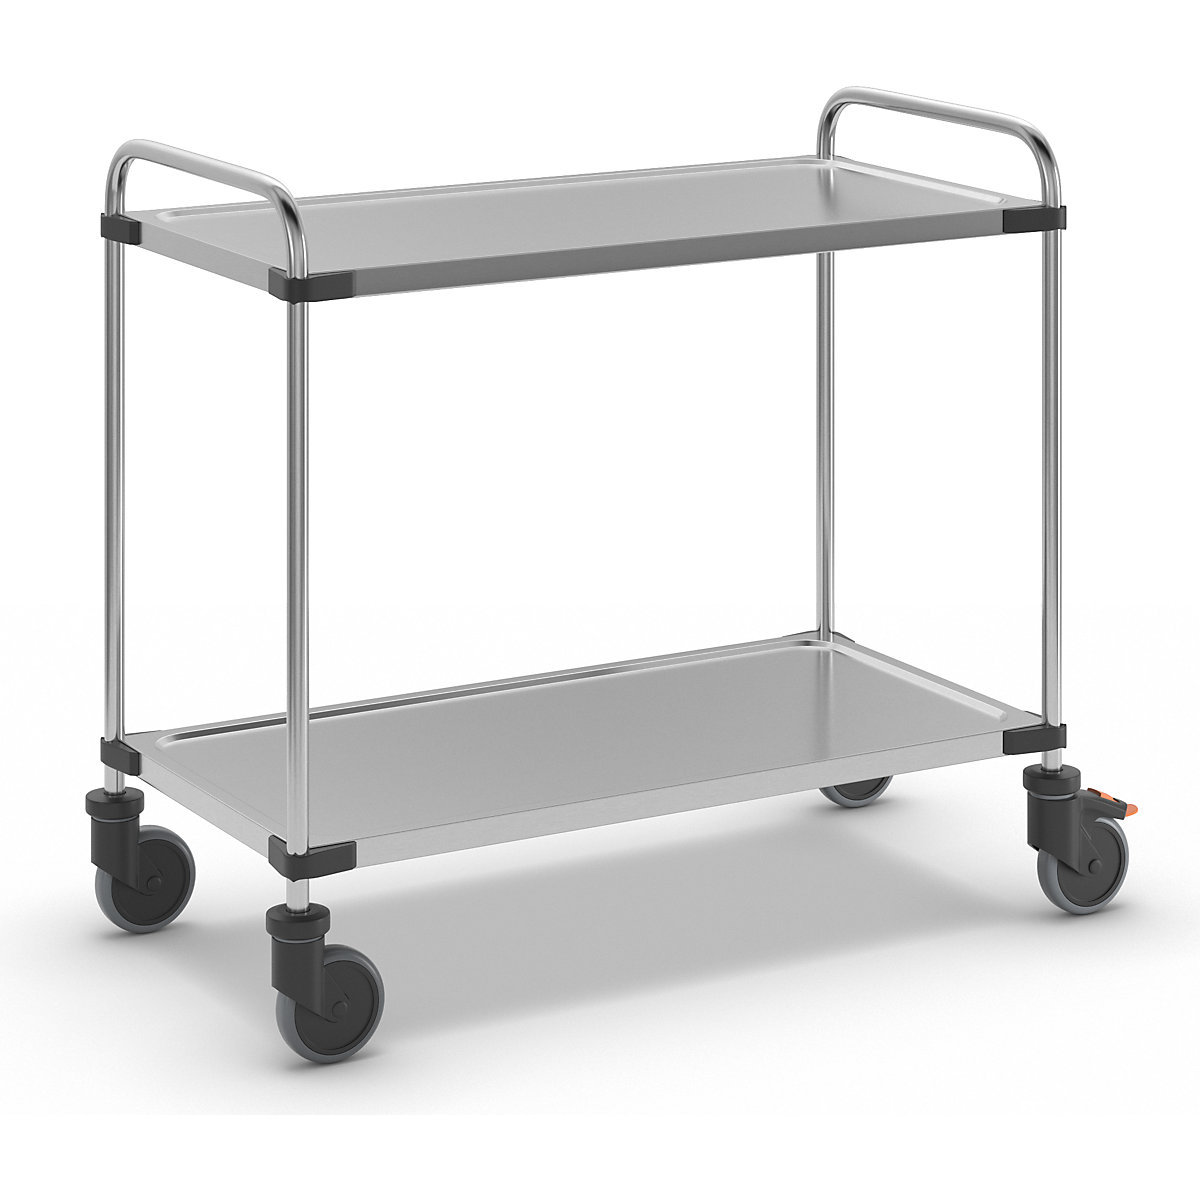 Stainless steel table trolley, with 2 shelves, LxWxH 1070 x 570 x 950 mm, unassembled-1